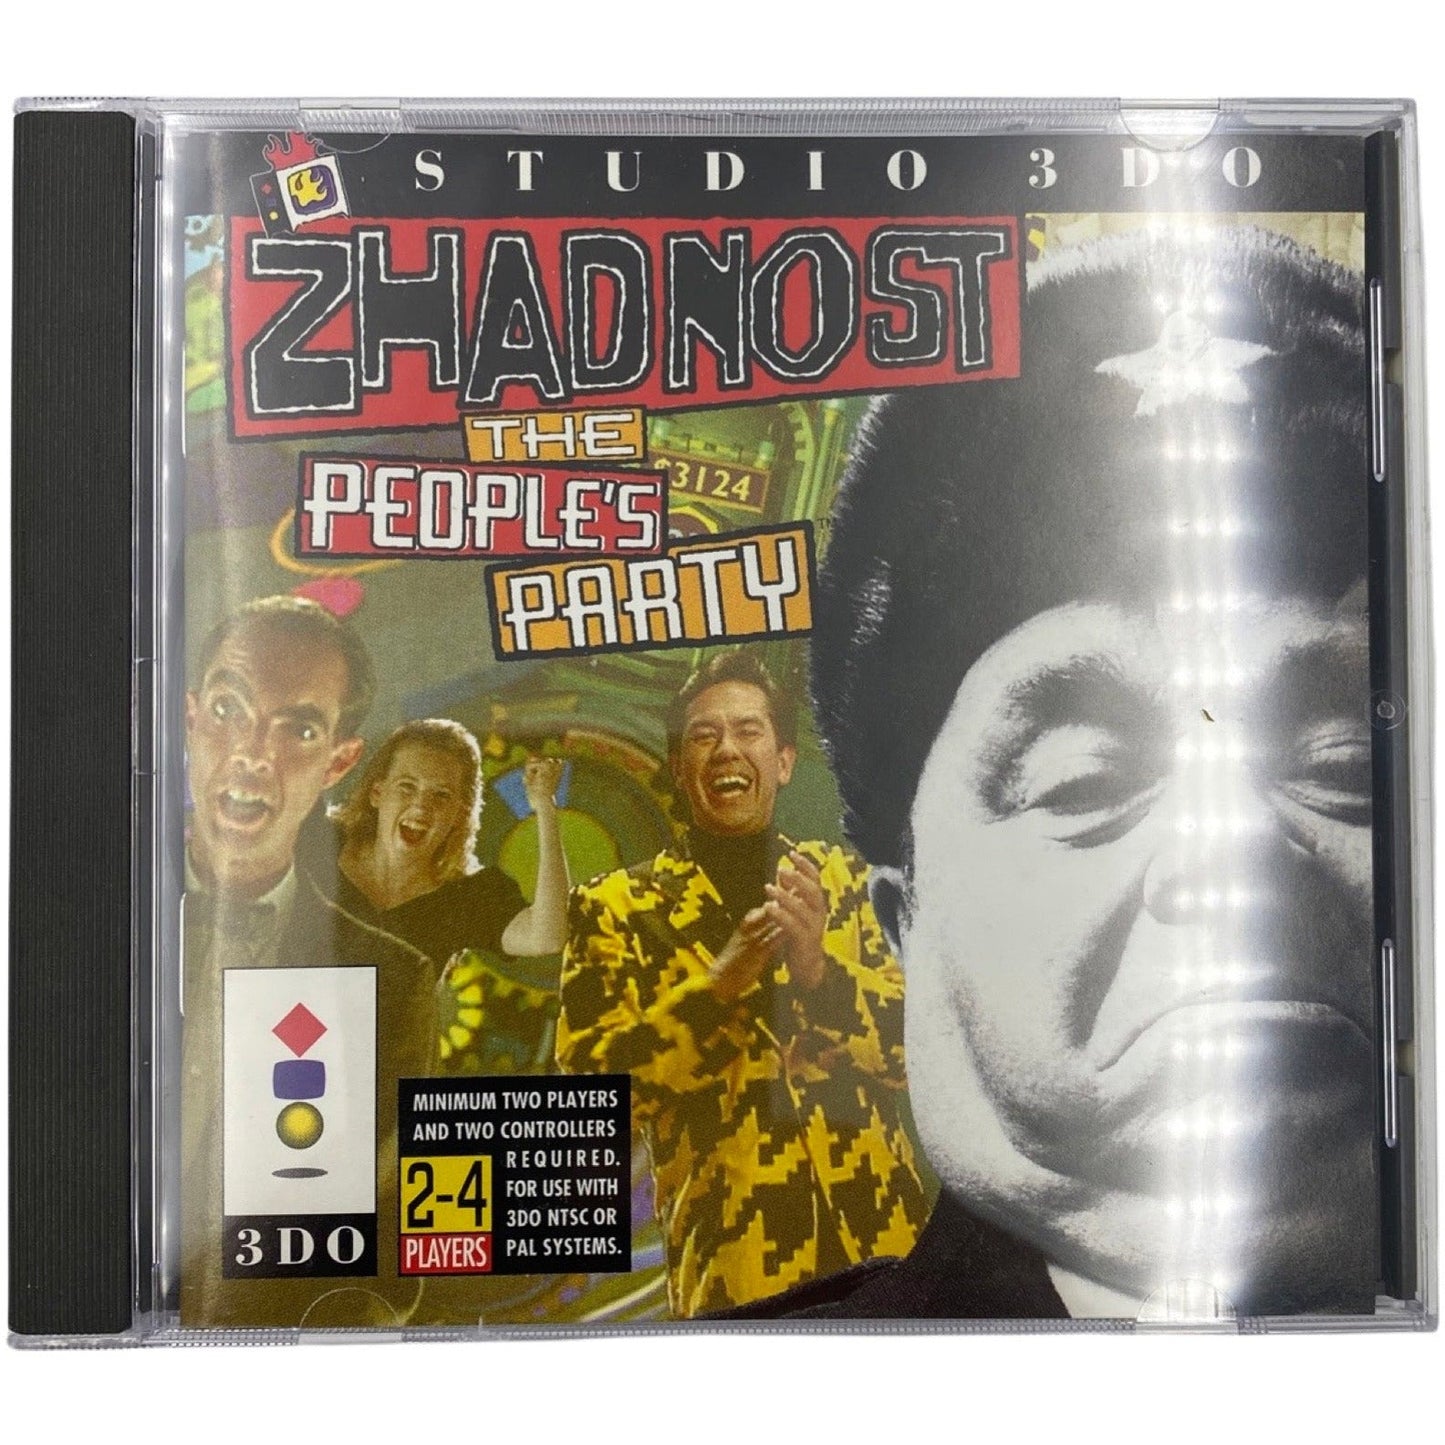 Zhadnost: The People's Party - Panasonic 3DO